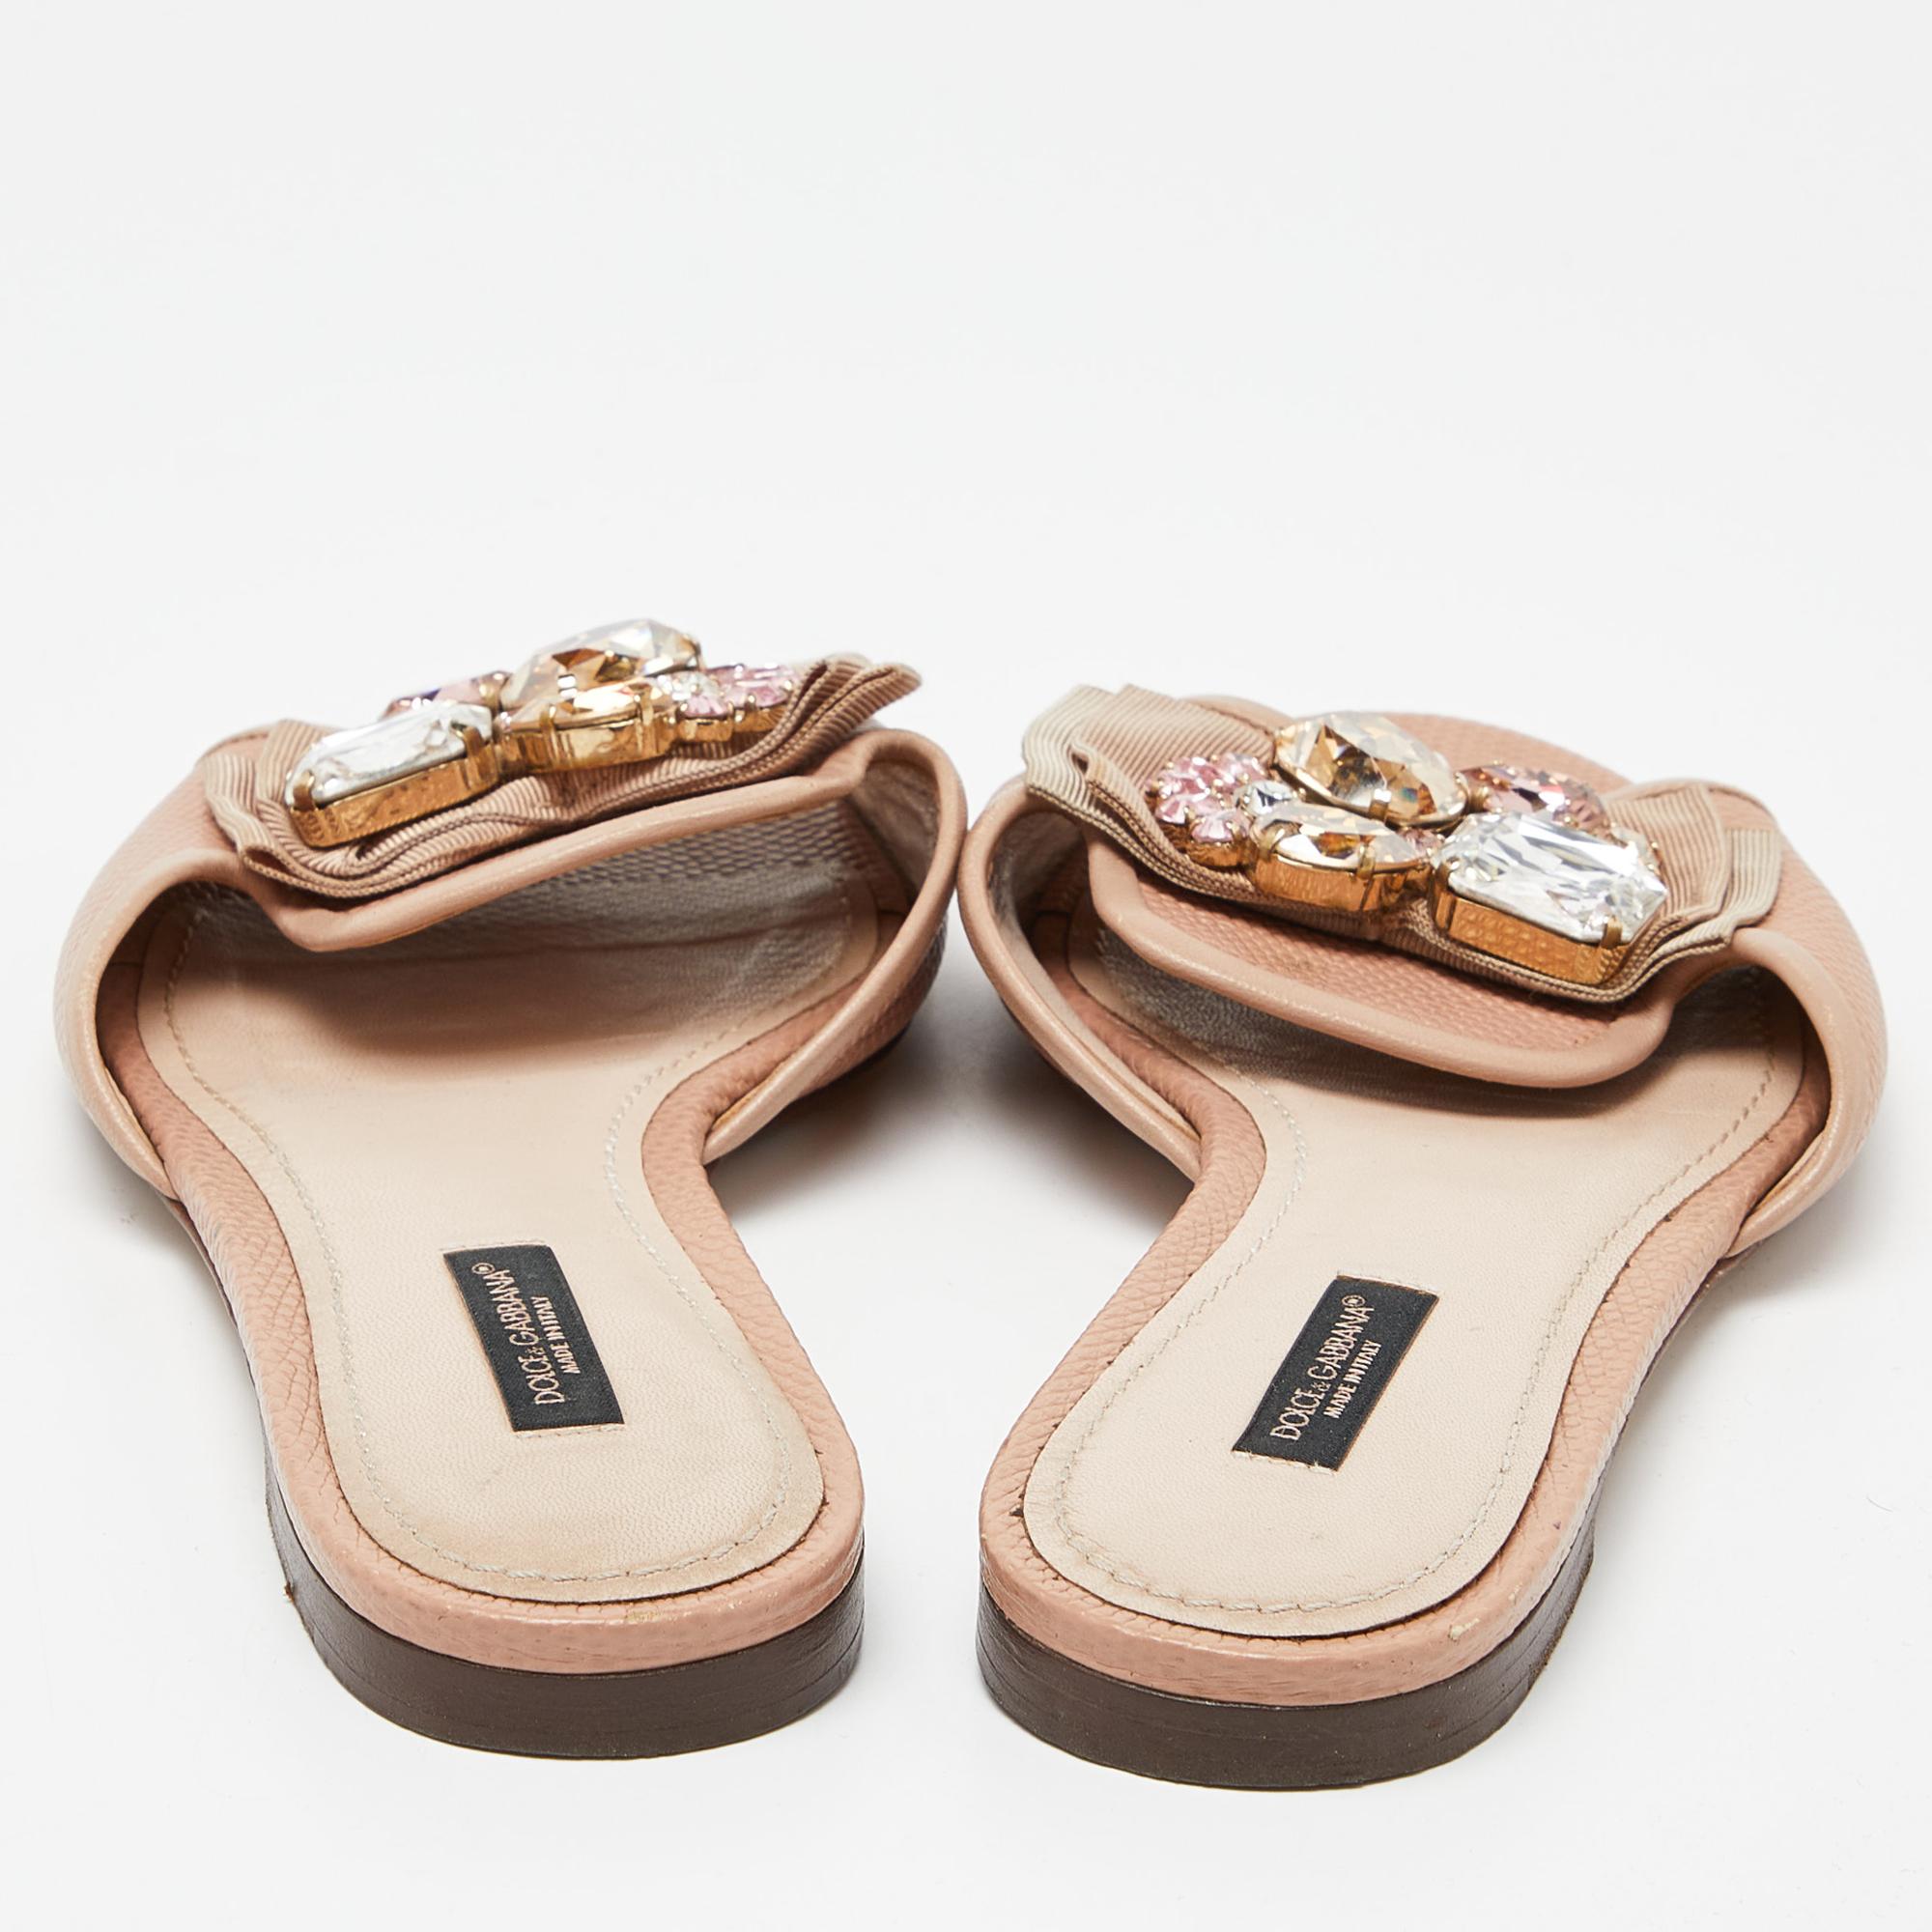 Dolce & Gabbana Pink Lizard Embossed Leather Crystal Bow Flat Slides Size 37 In Excellent Condition For Sale In Dubai, Al Qouz 2